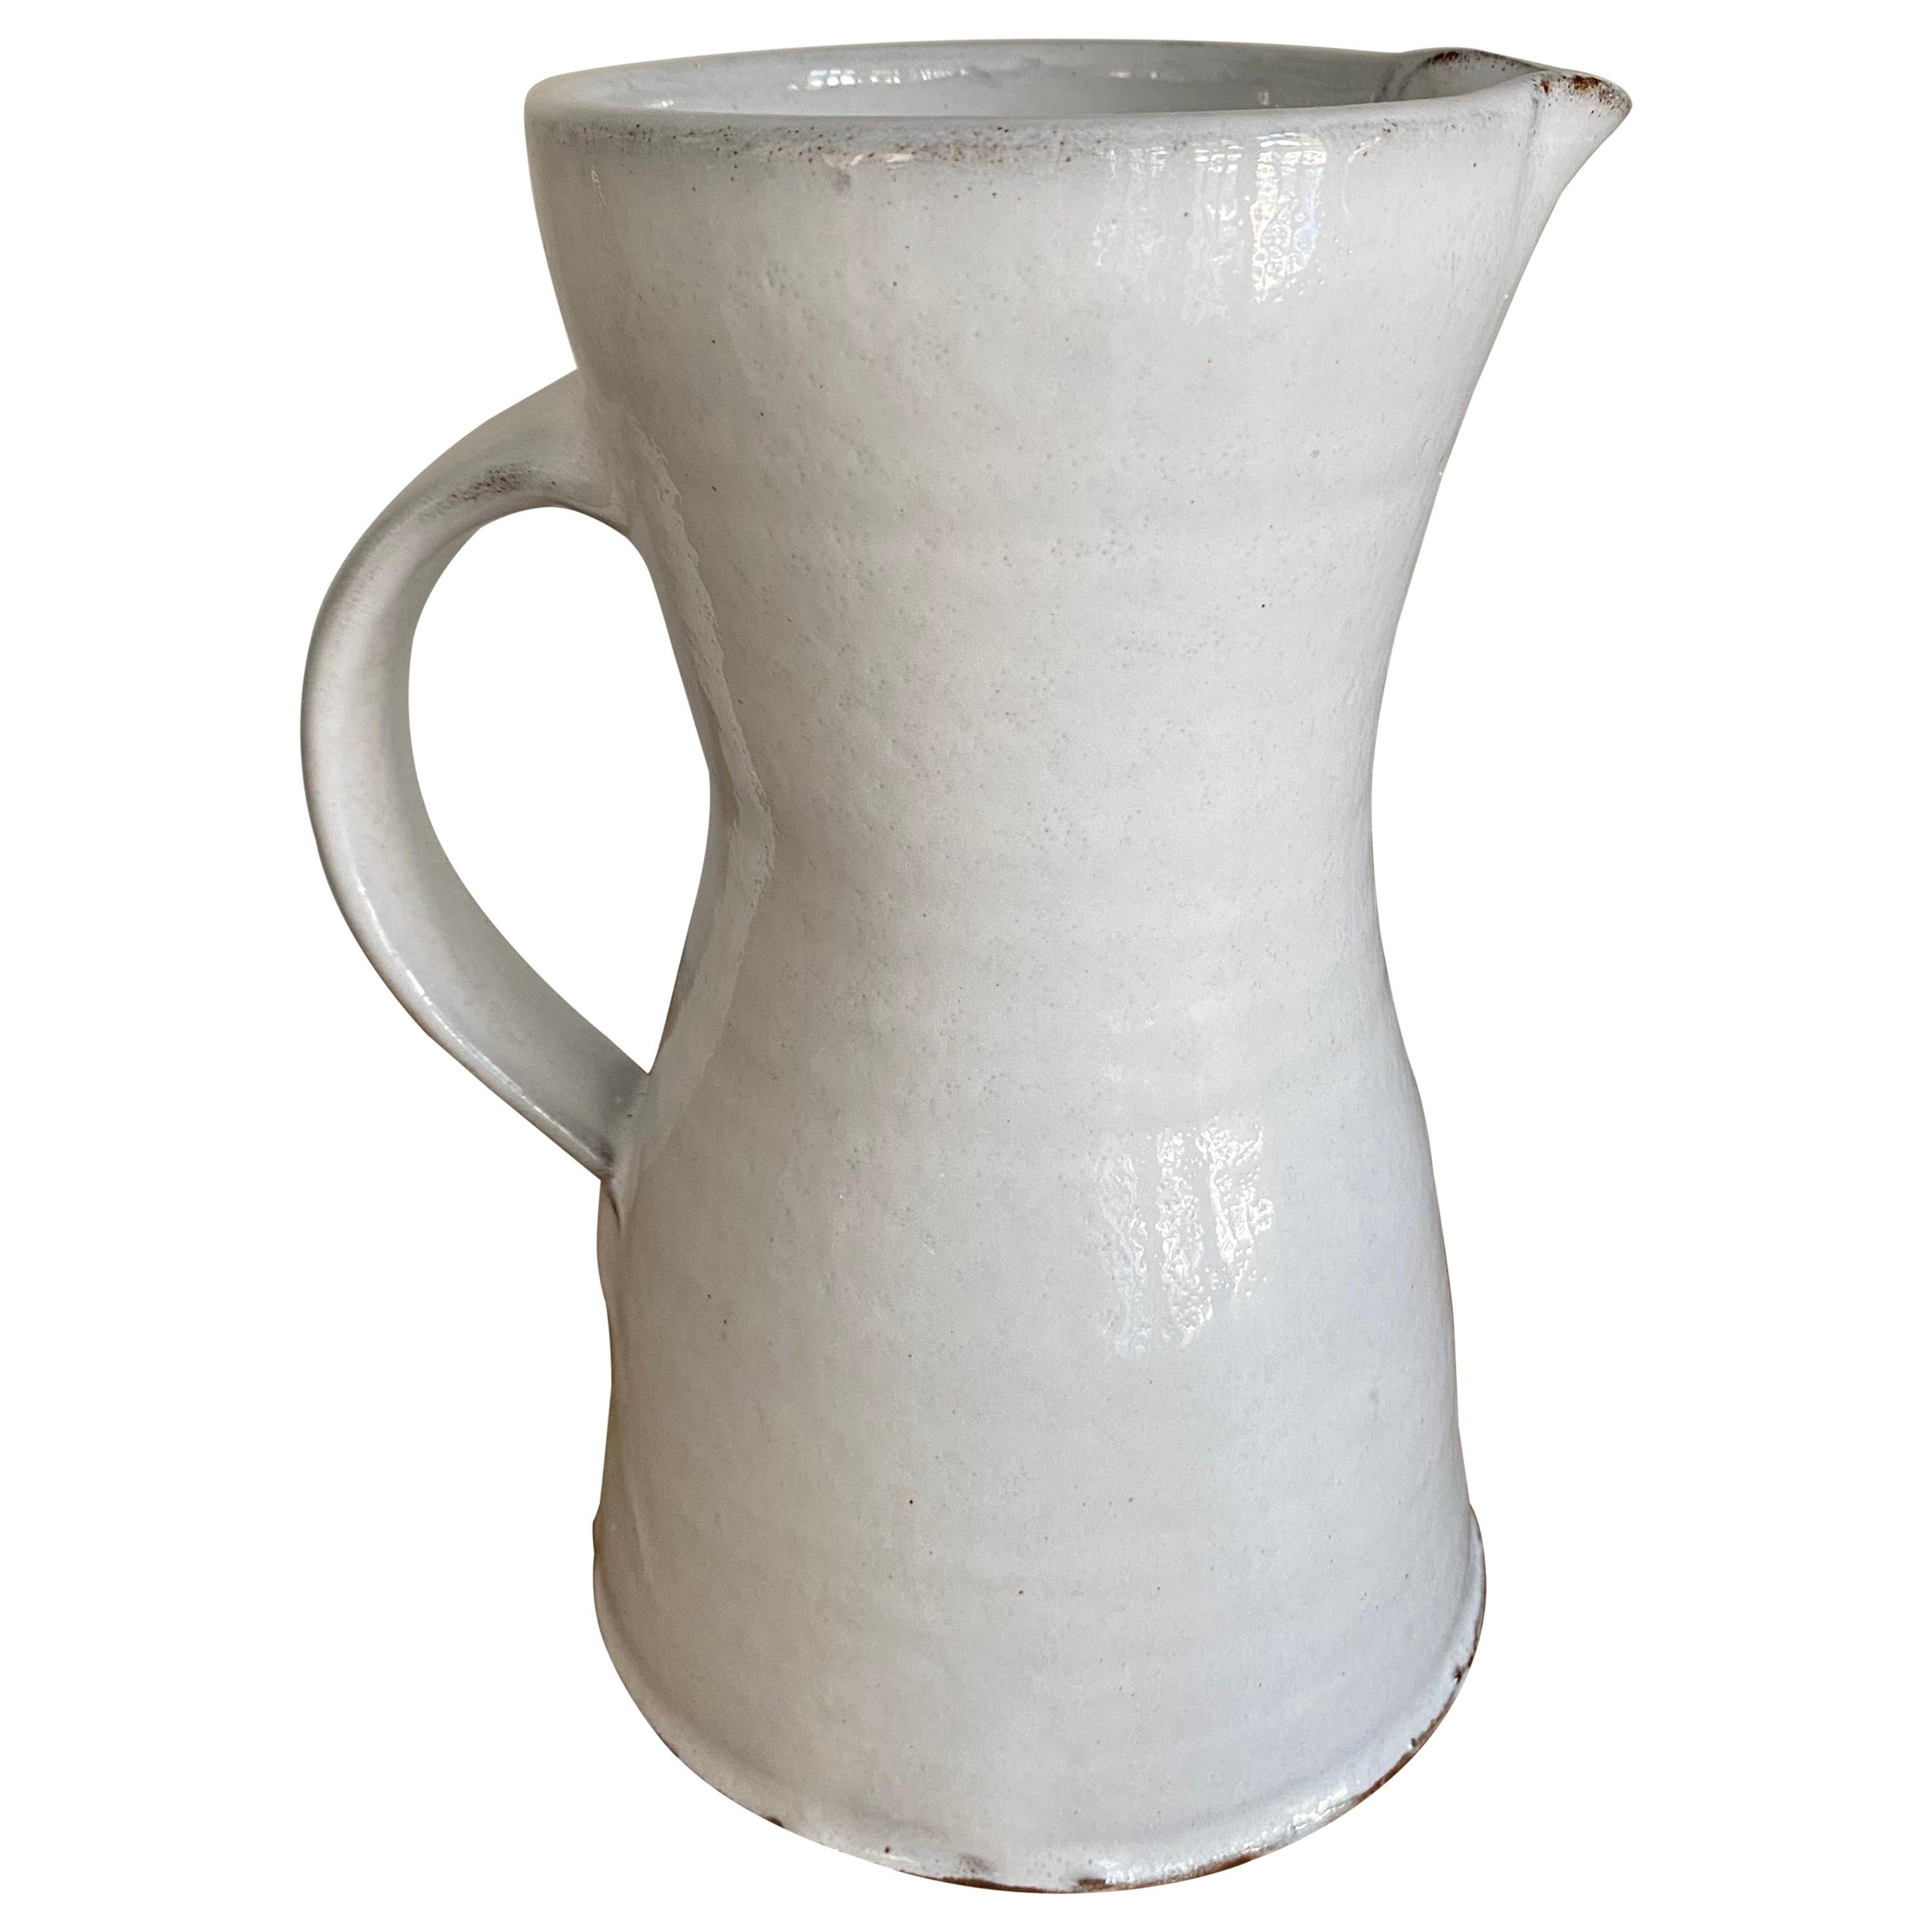 Handcrafted White Stoneware Pitcher by Mats Svensson